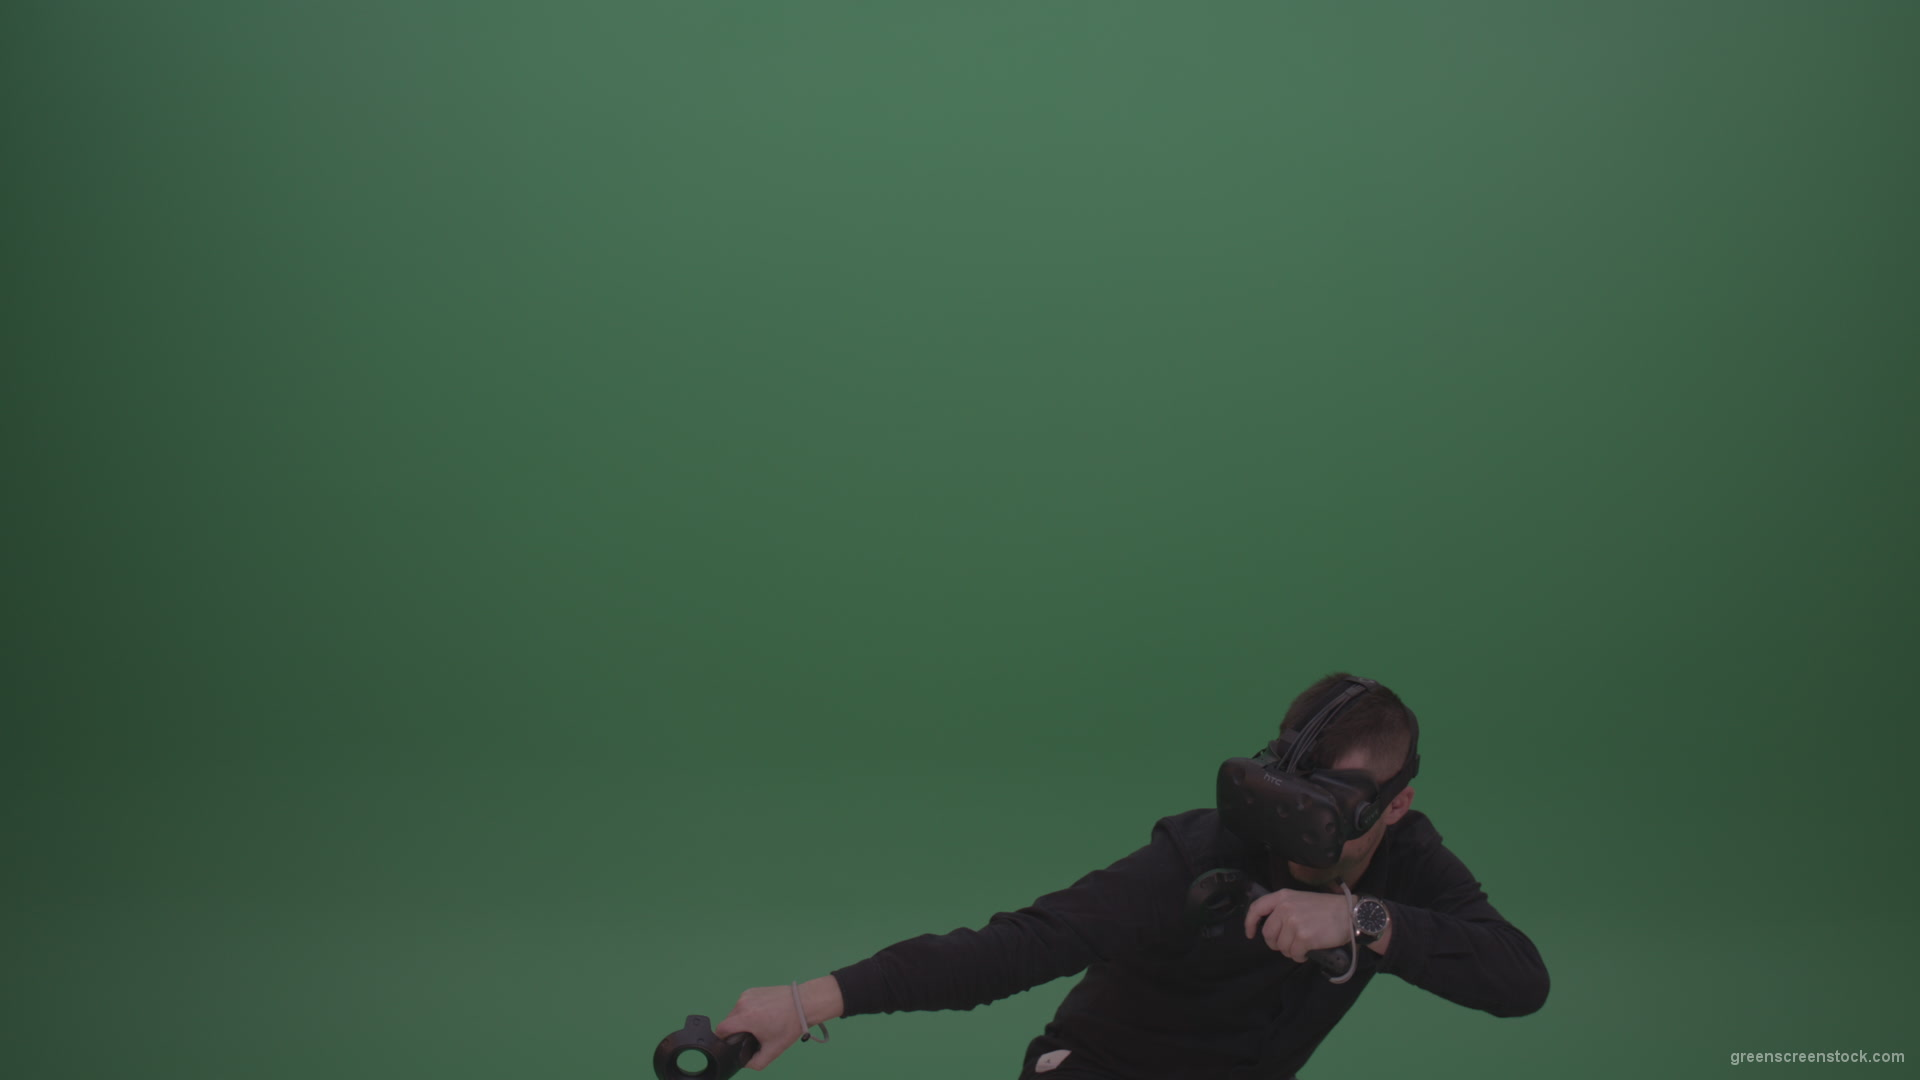 Young_Dangerous_Brunette_Man_Wearing_Black_Shirt_Shooting_Enemies_All_Around_In_Virtual_Reality_Glasses_Green_Screen_Wall_Background_006 Green Screen Stock